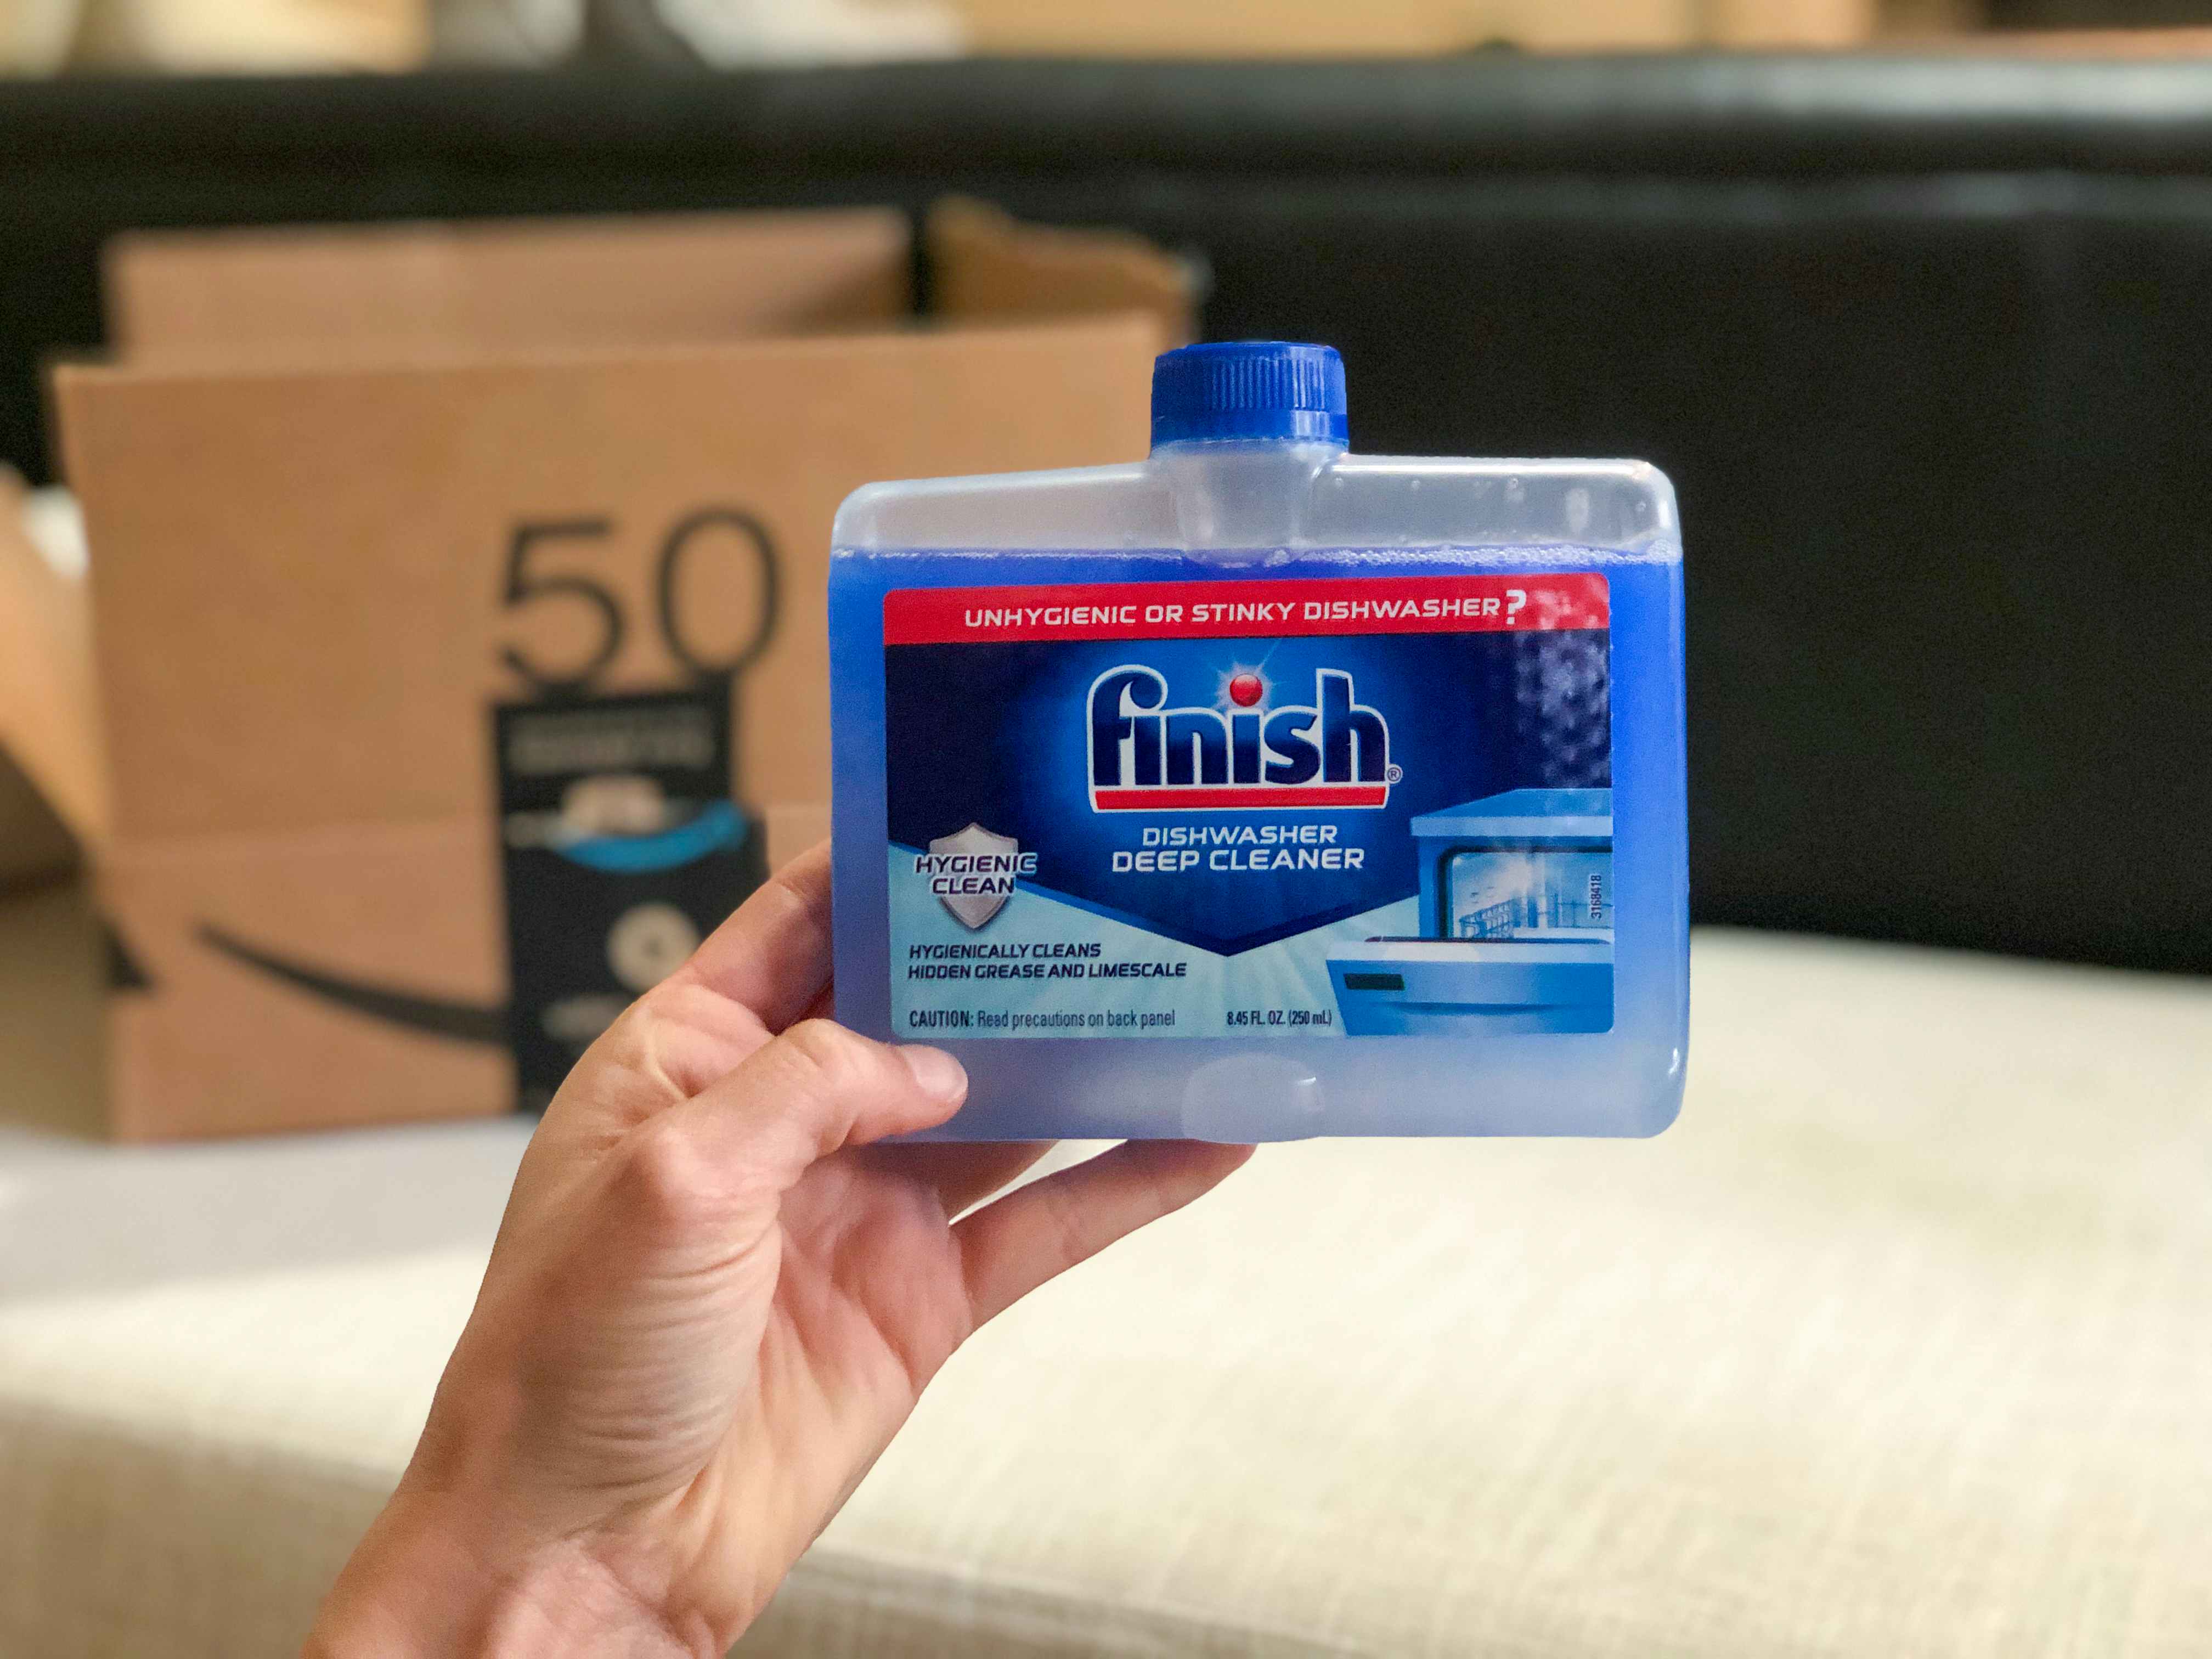 Finish Dishwasher Cleaner, as Low as $1.26 on Amazon